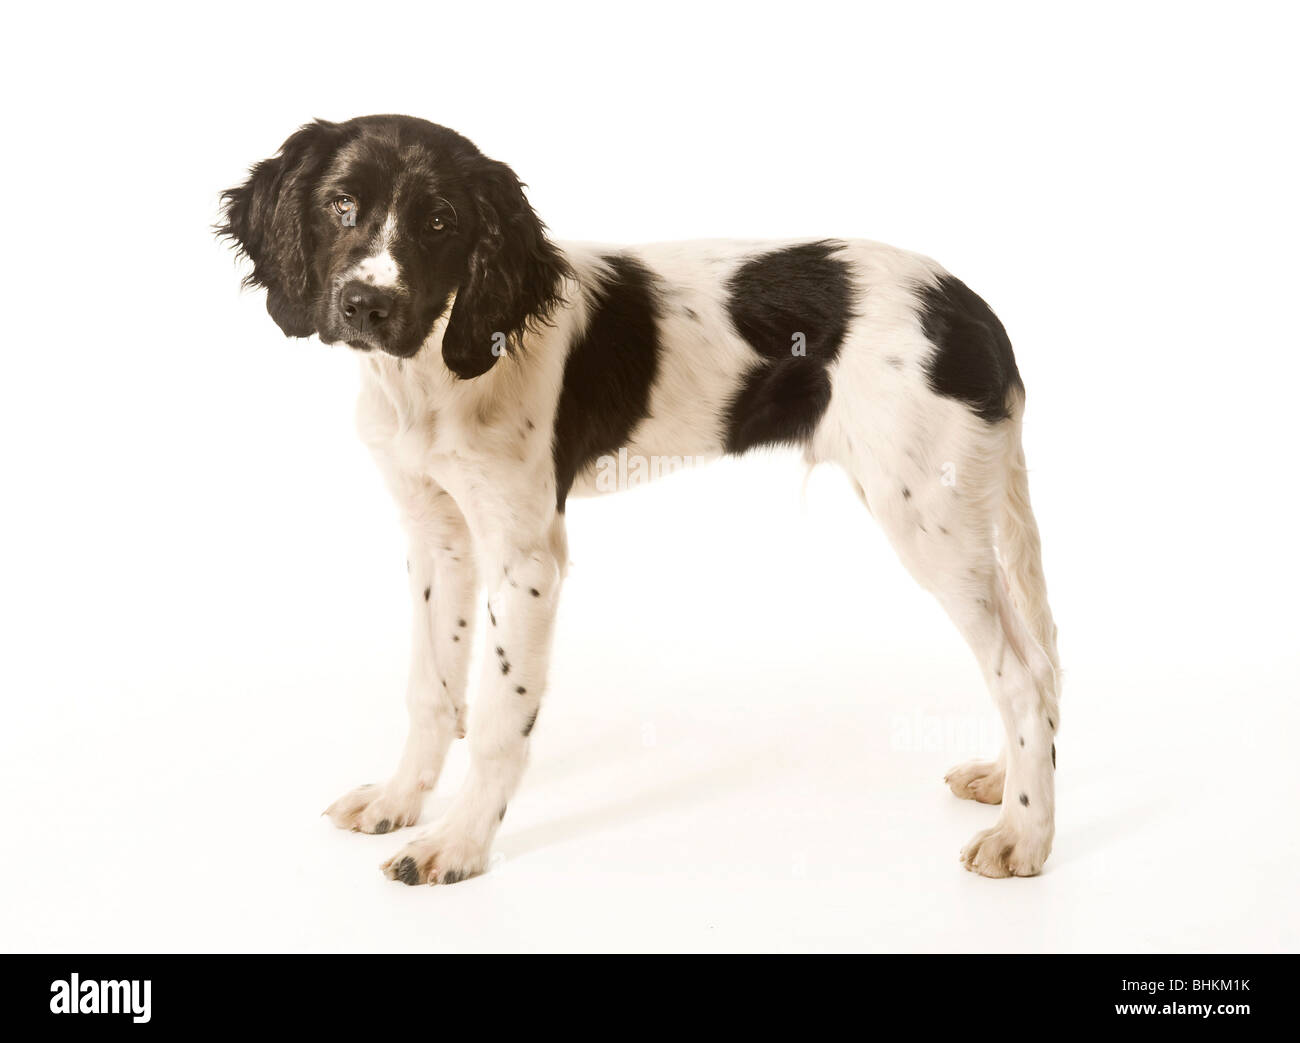 Side view of a black and white Large Munsterlander puppy standing on white background. Stock Photo